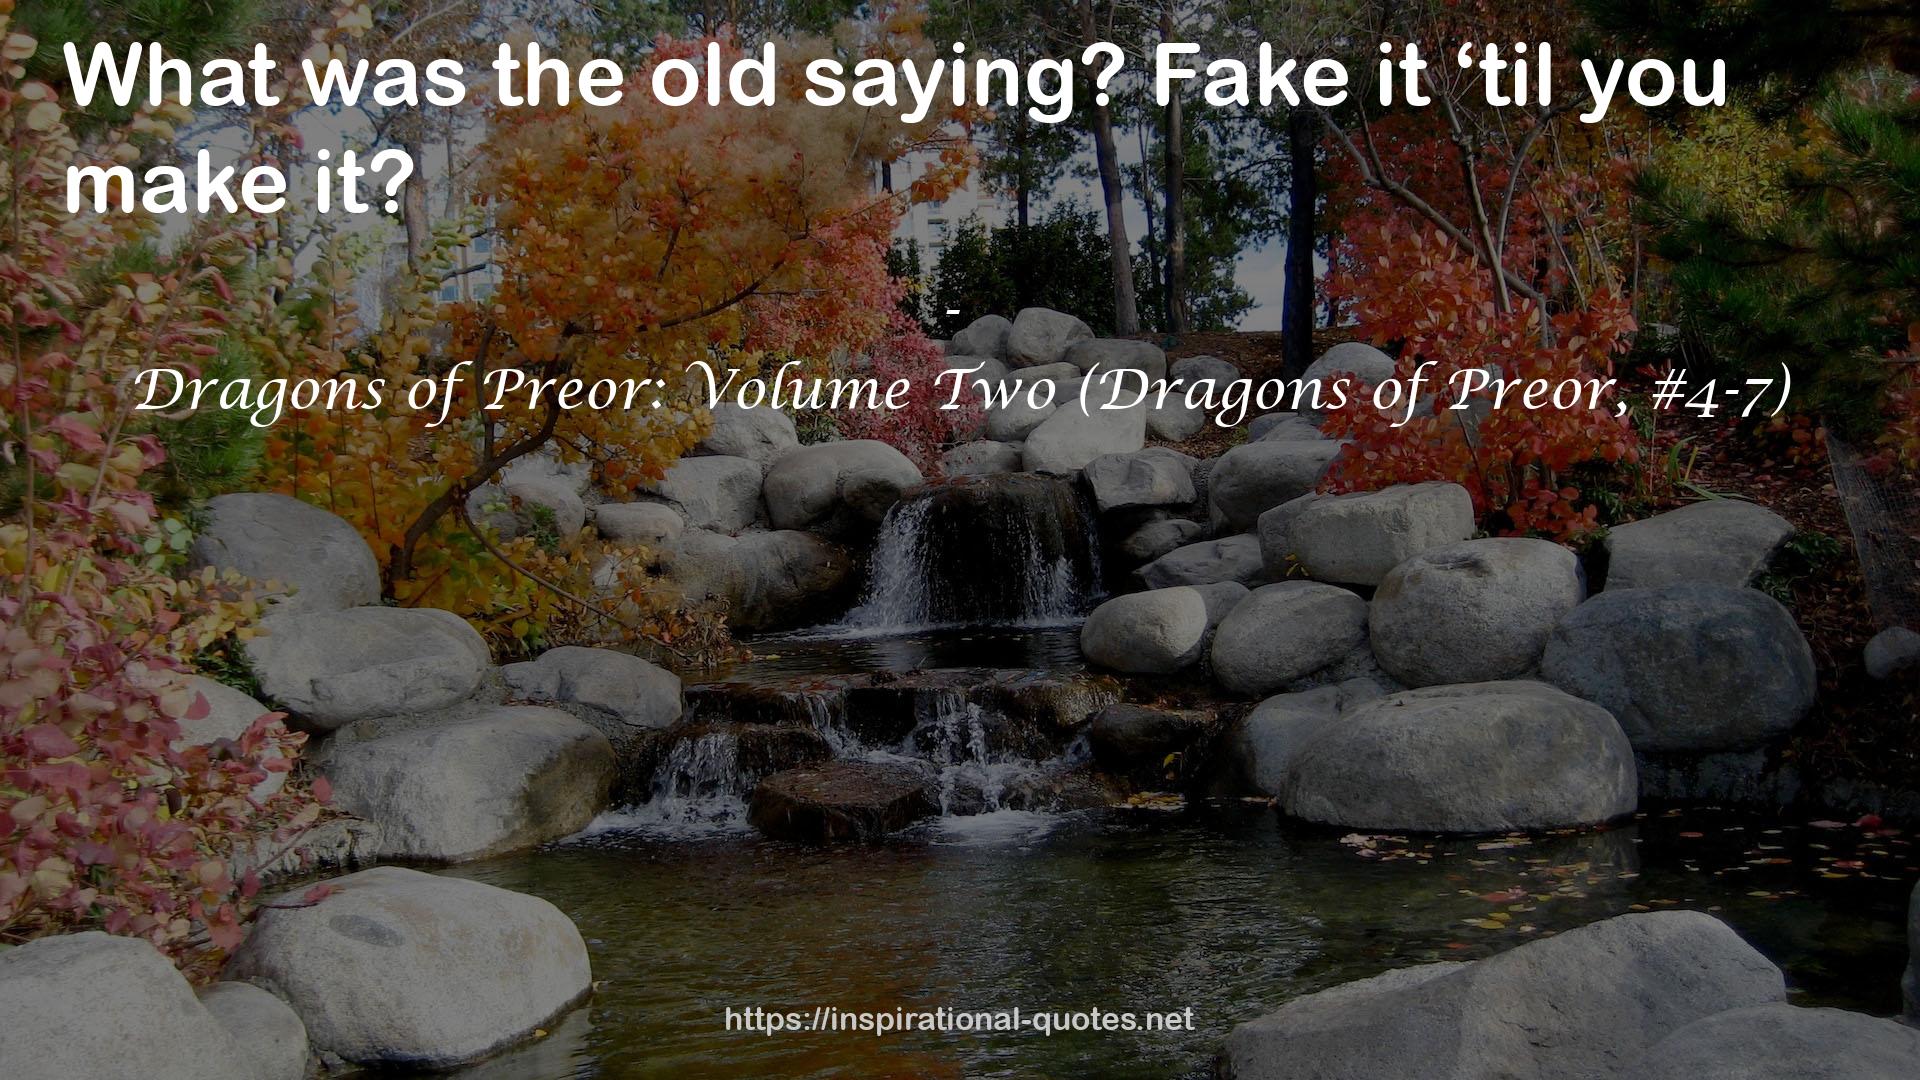 Dragons of Preor: Volume Two (Dragons of Preor, #4-7) QUOTES